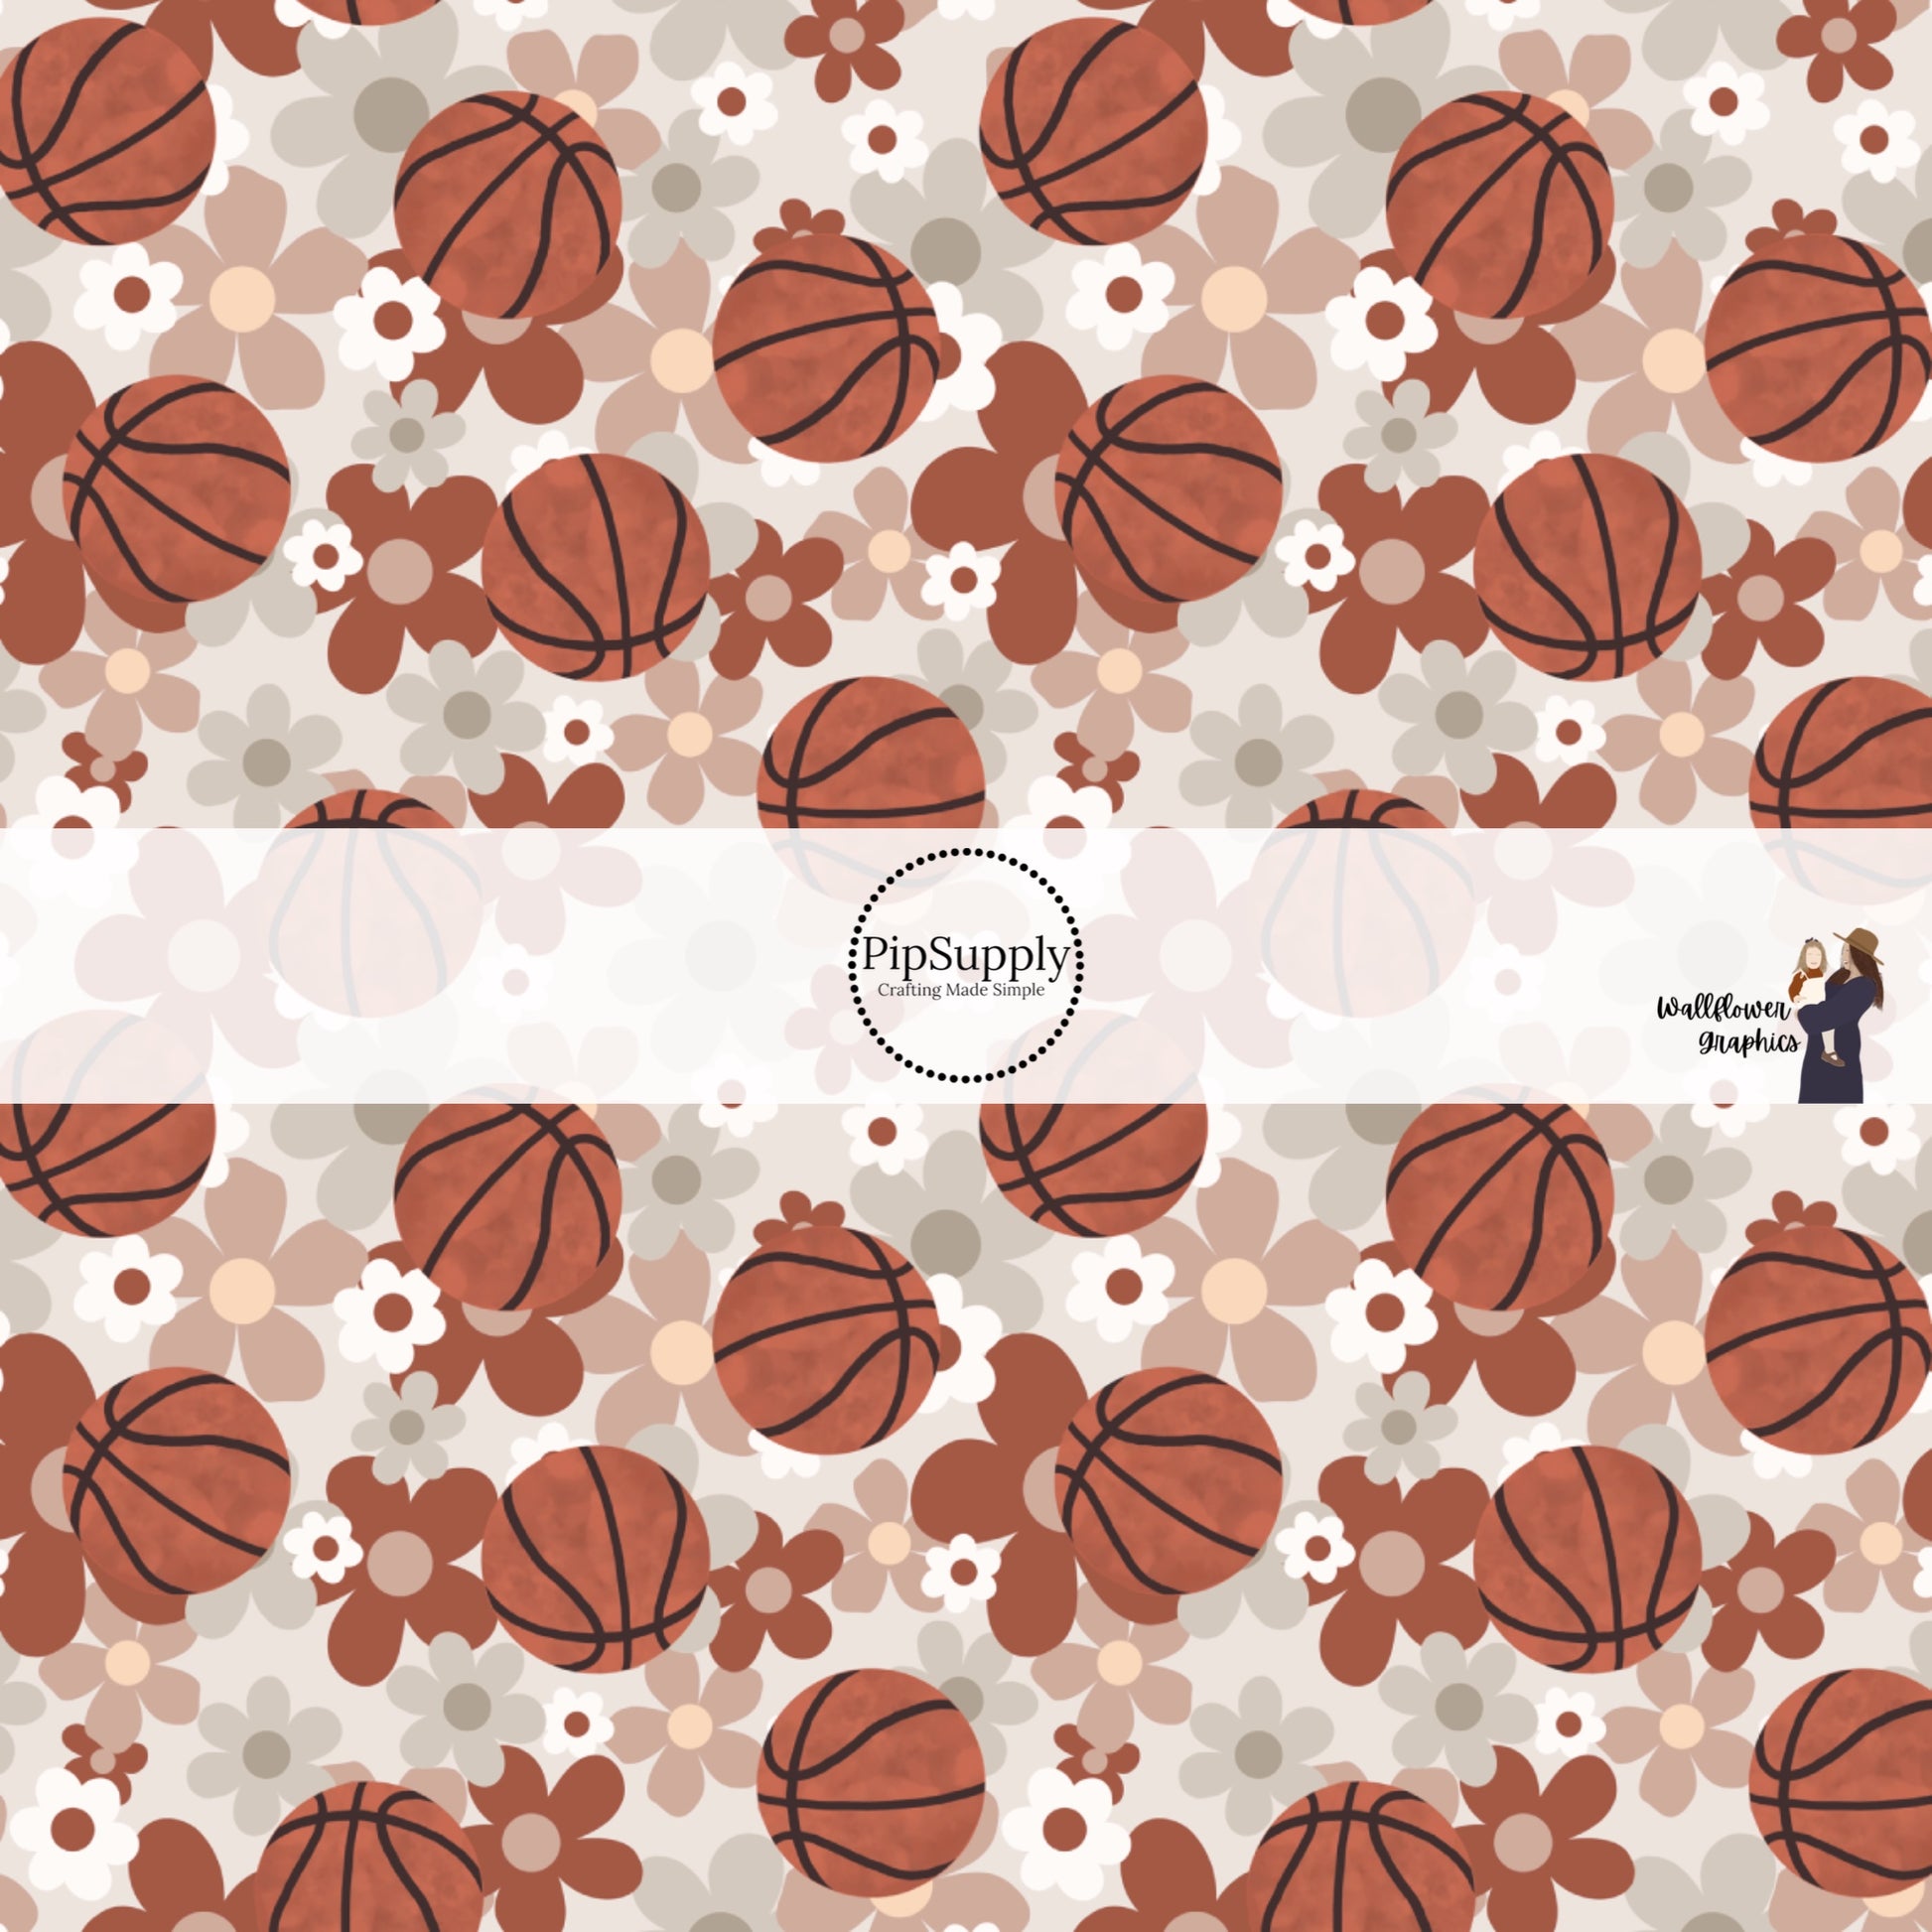 Light gray fabric by the yard with basketballs and gray, red, and white florals.